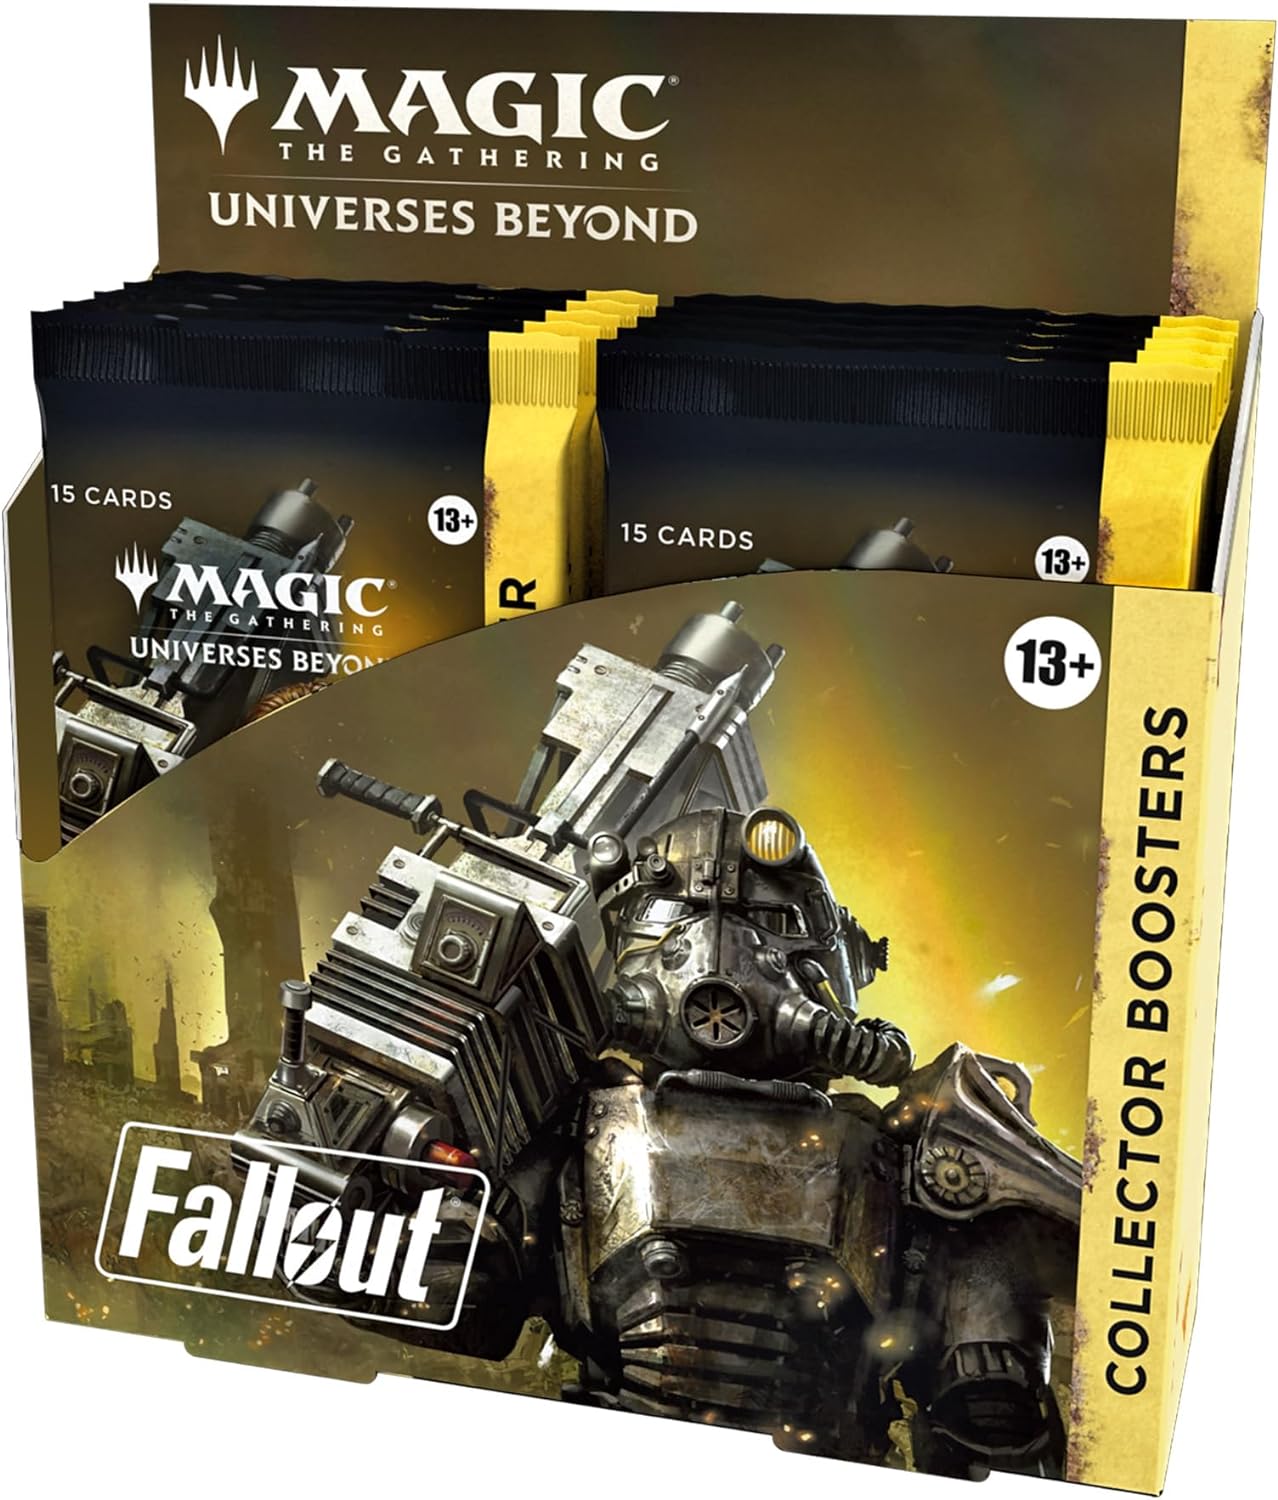 Fallout Collector Booster Box | Gamer Loot